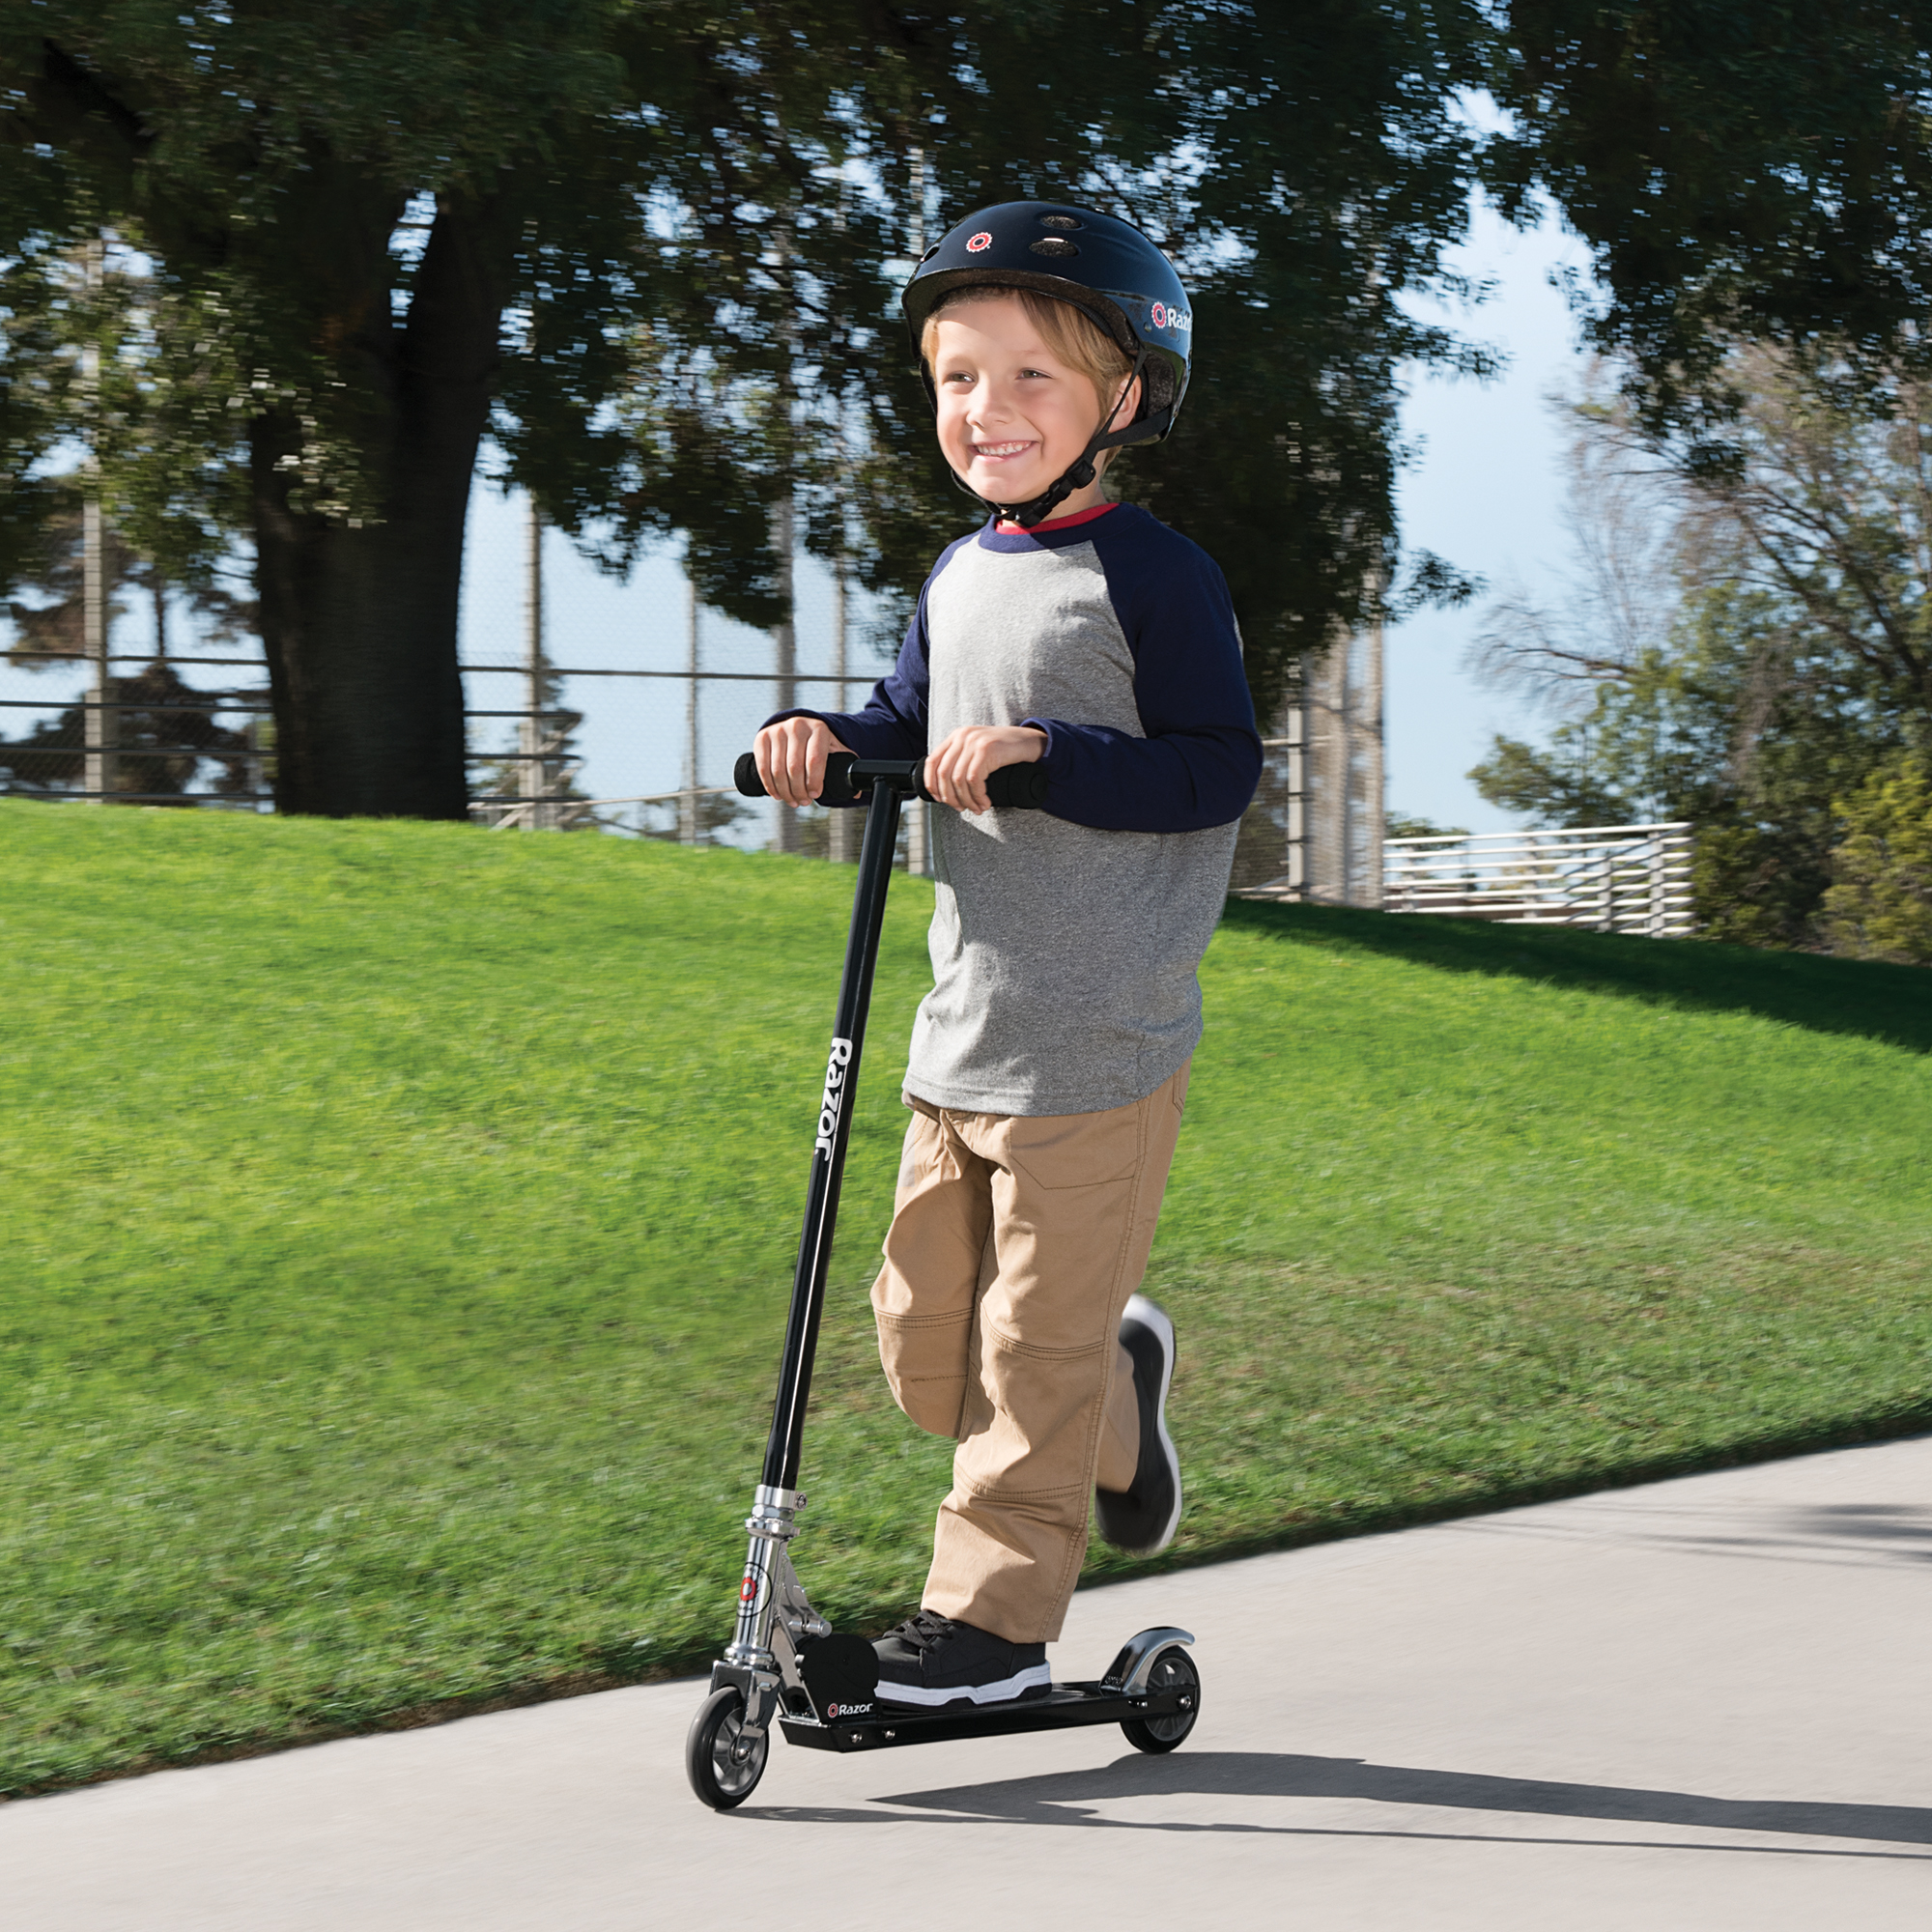 Razor S Folding Kick Scooter - Black, for Kids Ages 5+ and up to 110 lb - image 3 of 9